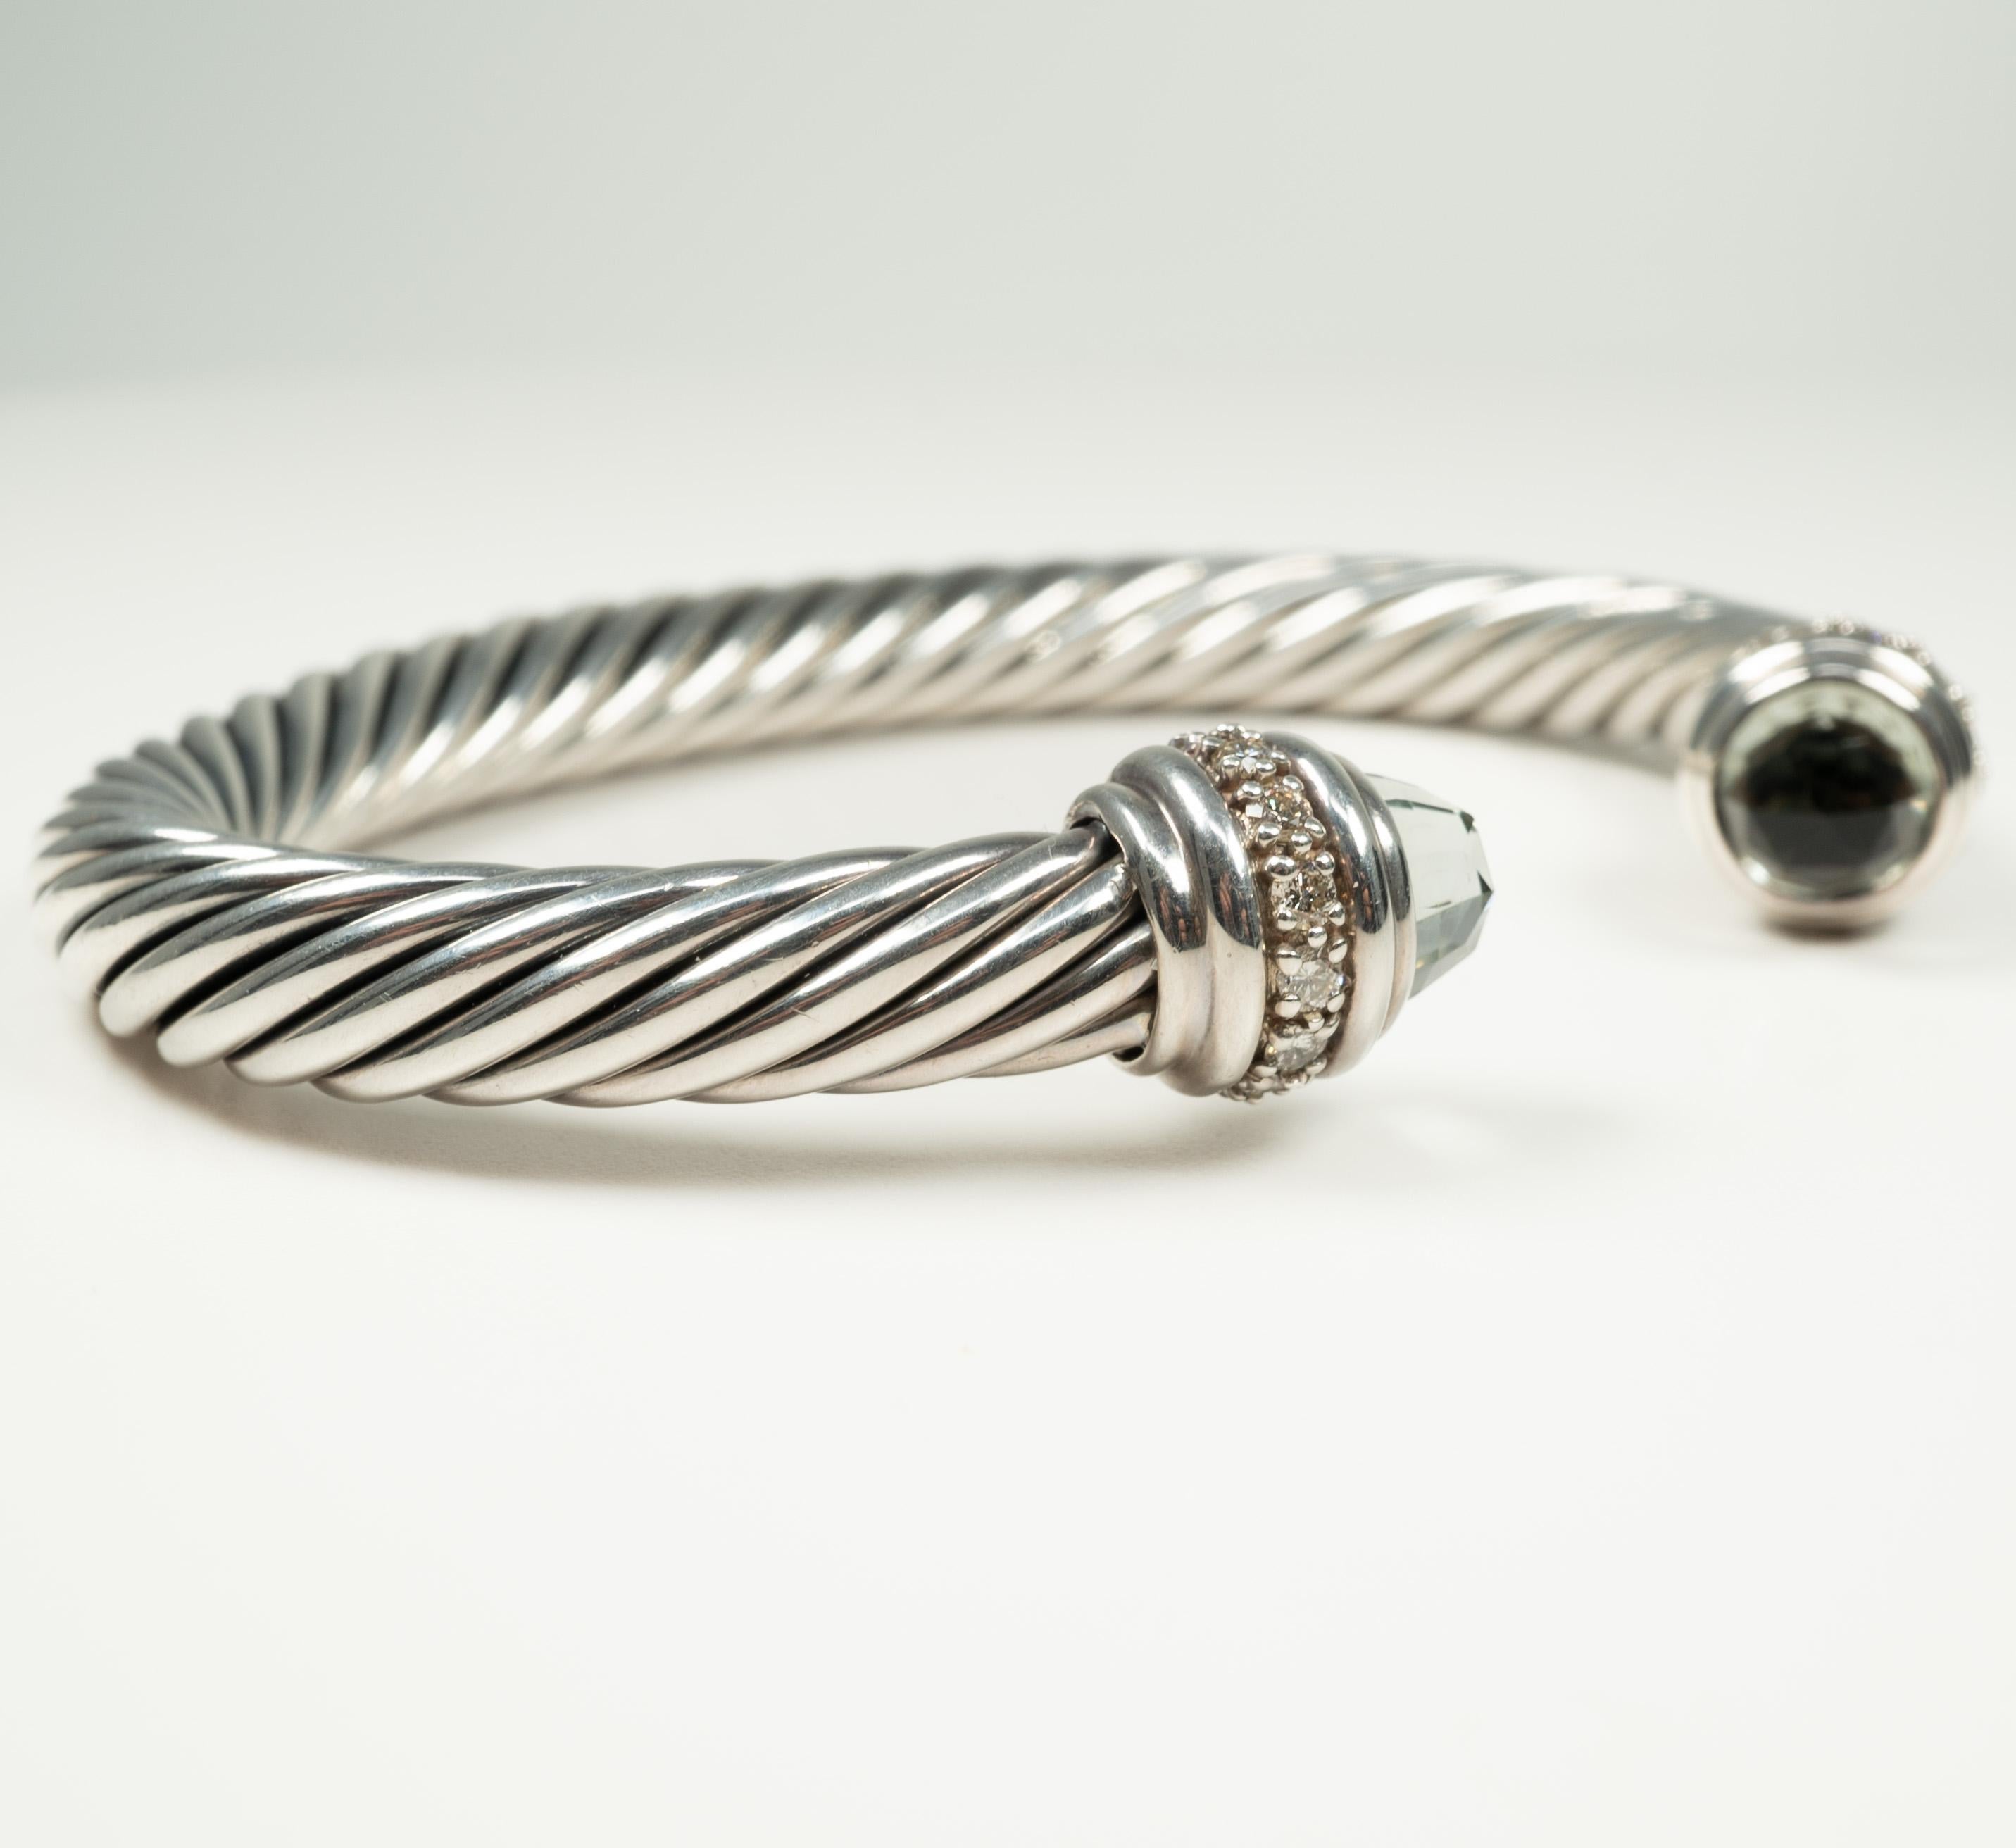 From famed designer David Yurman, this sterling silver, diamond  and prasiolite cable bracelet is a true classic!

